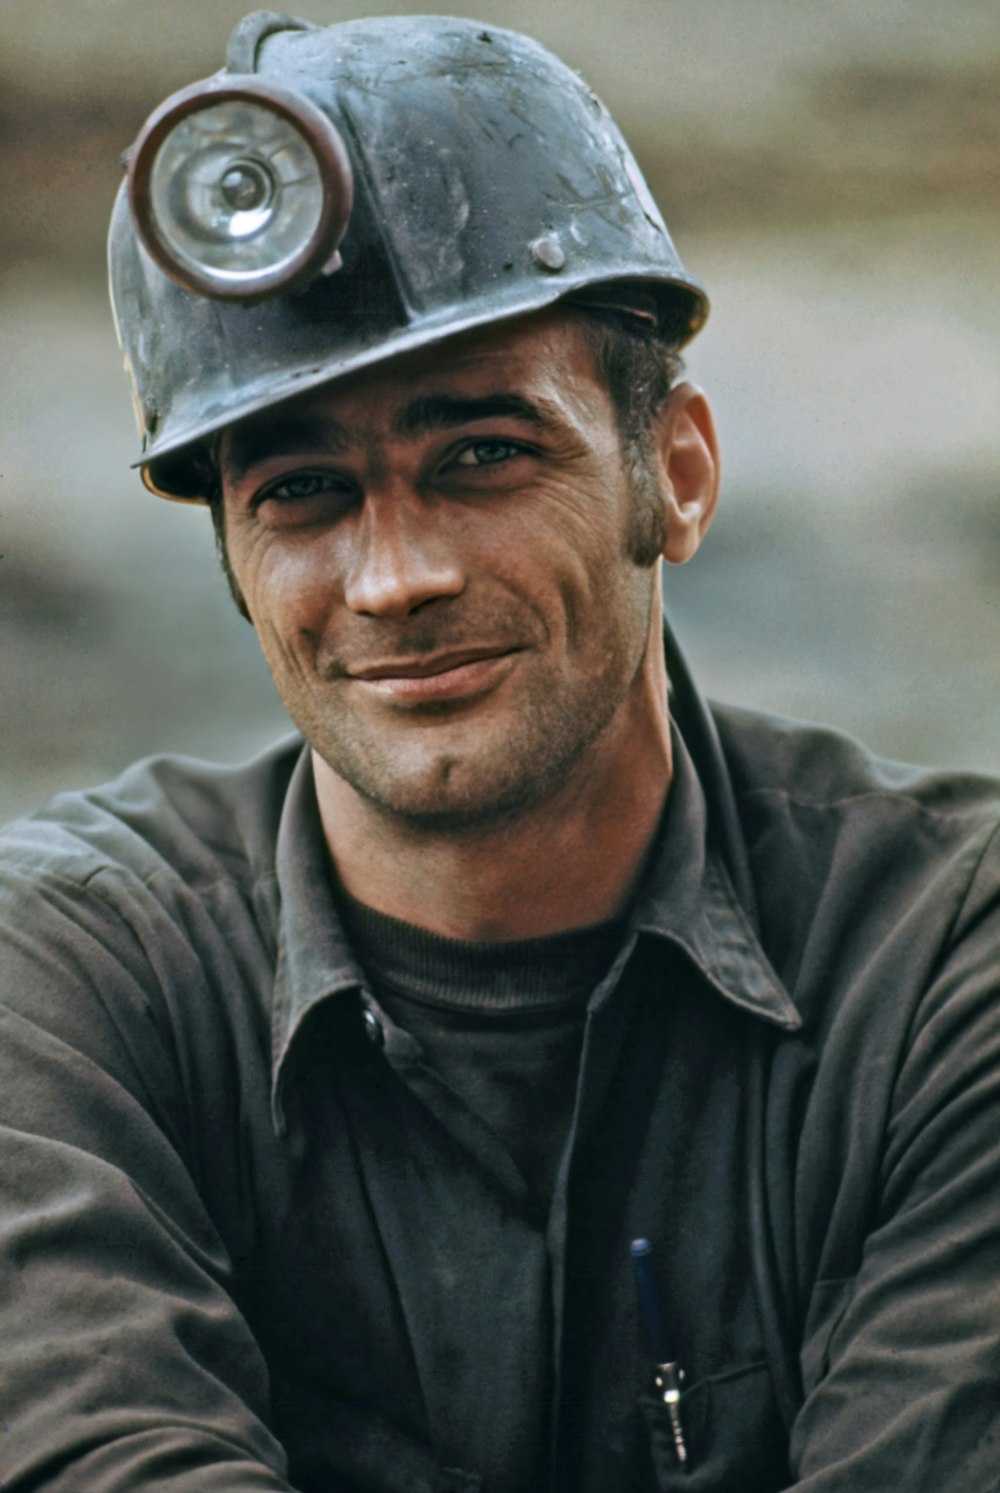 a man wearing a hard hat with a smile on his face